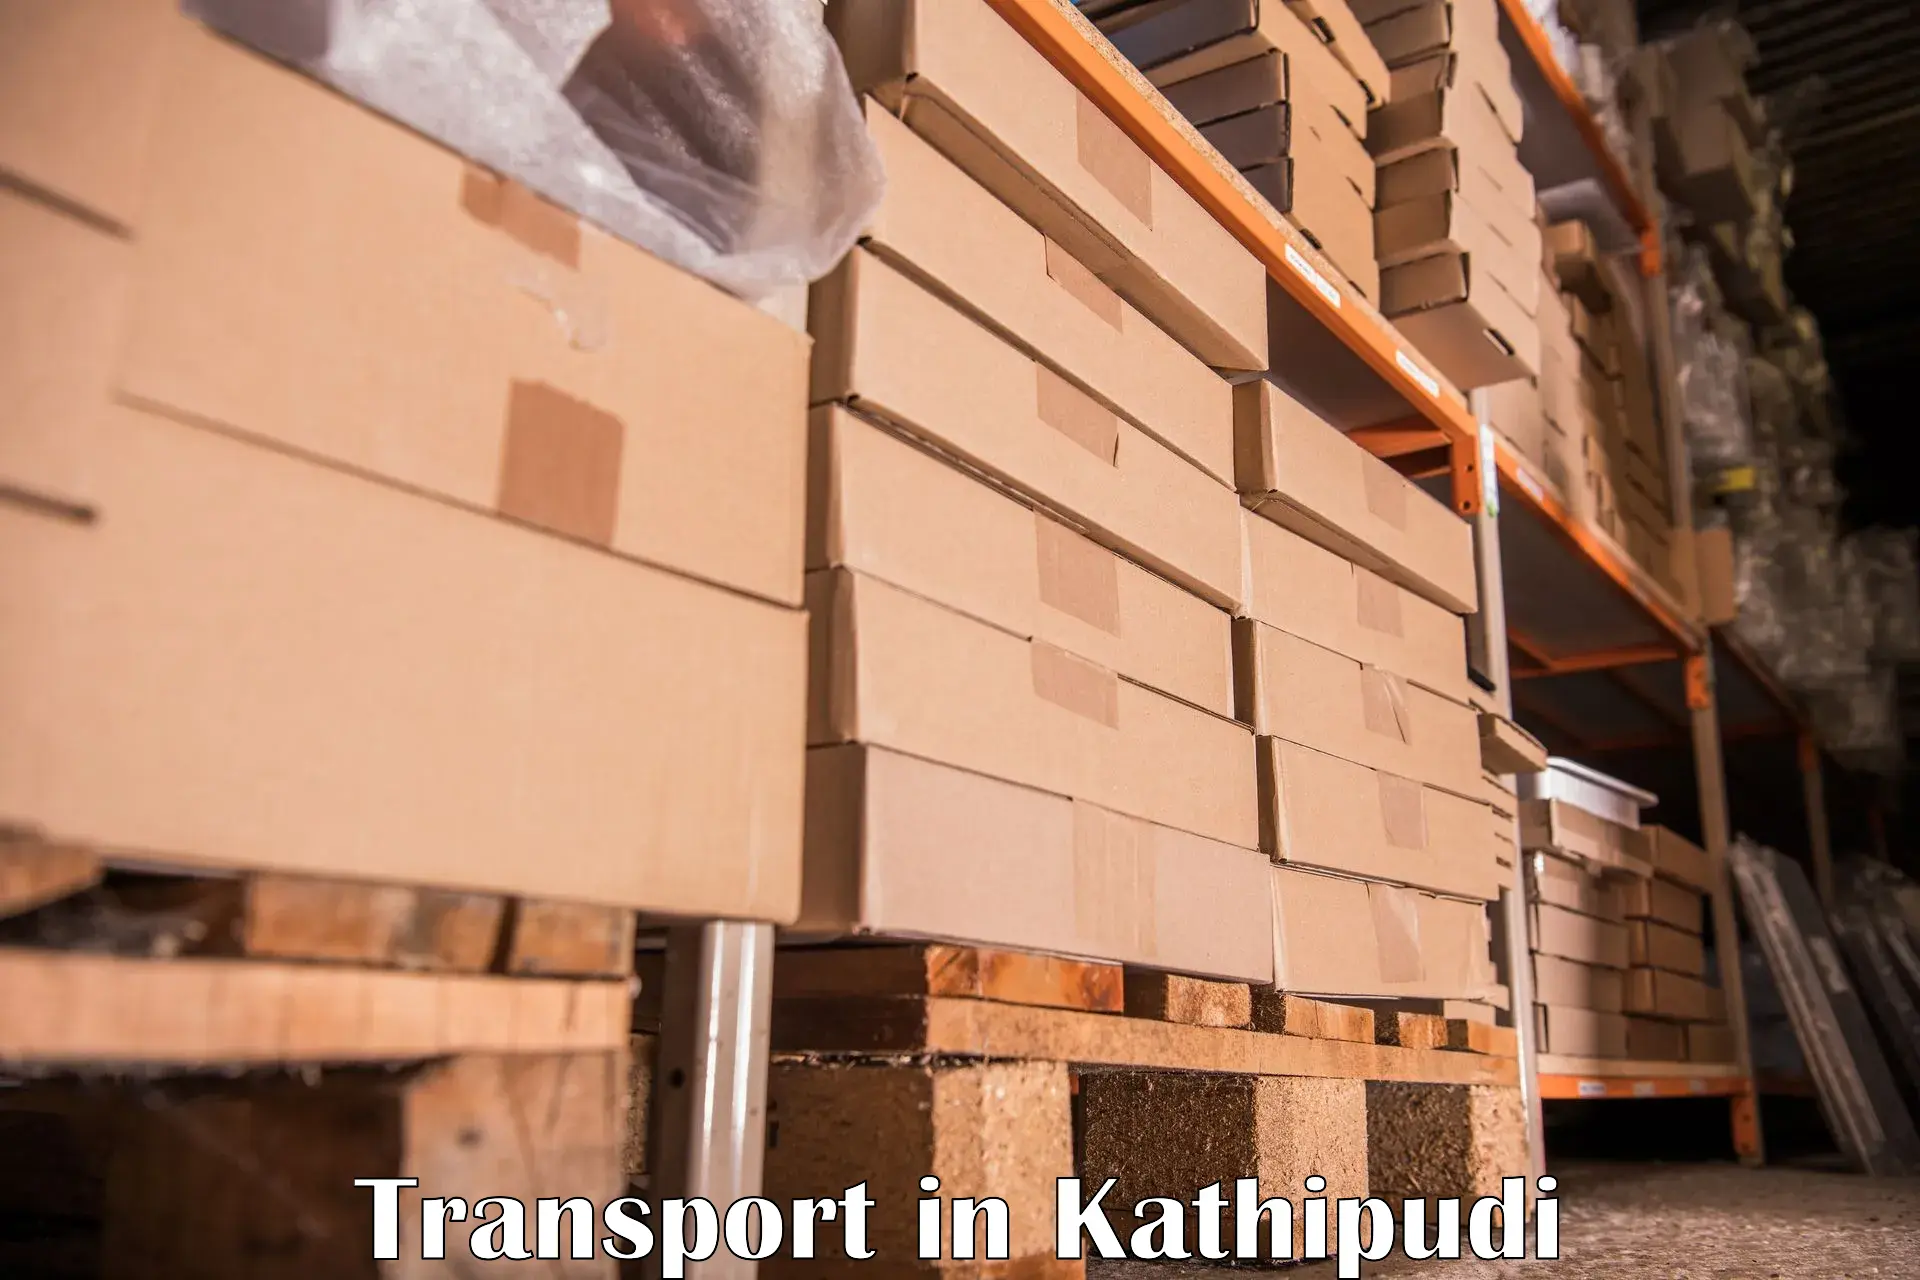 Air freight transport services in Kathipudi